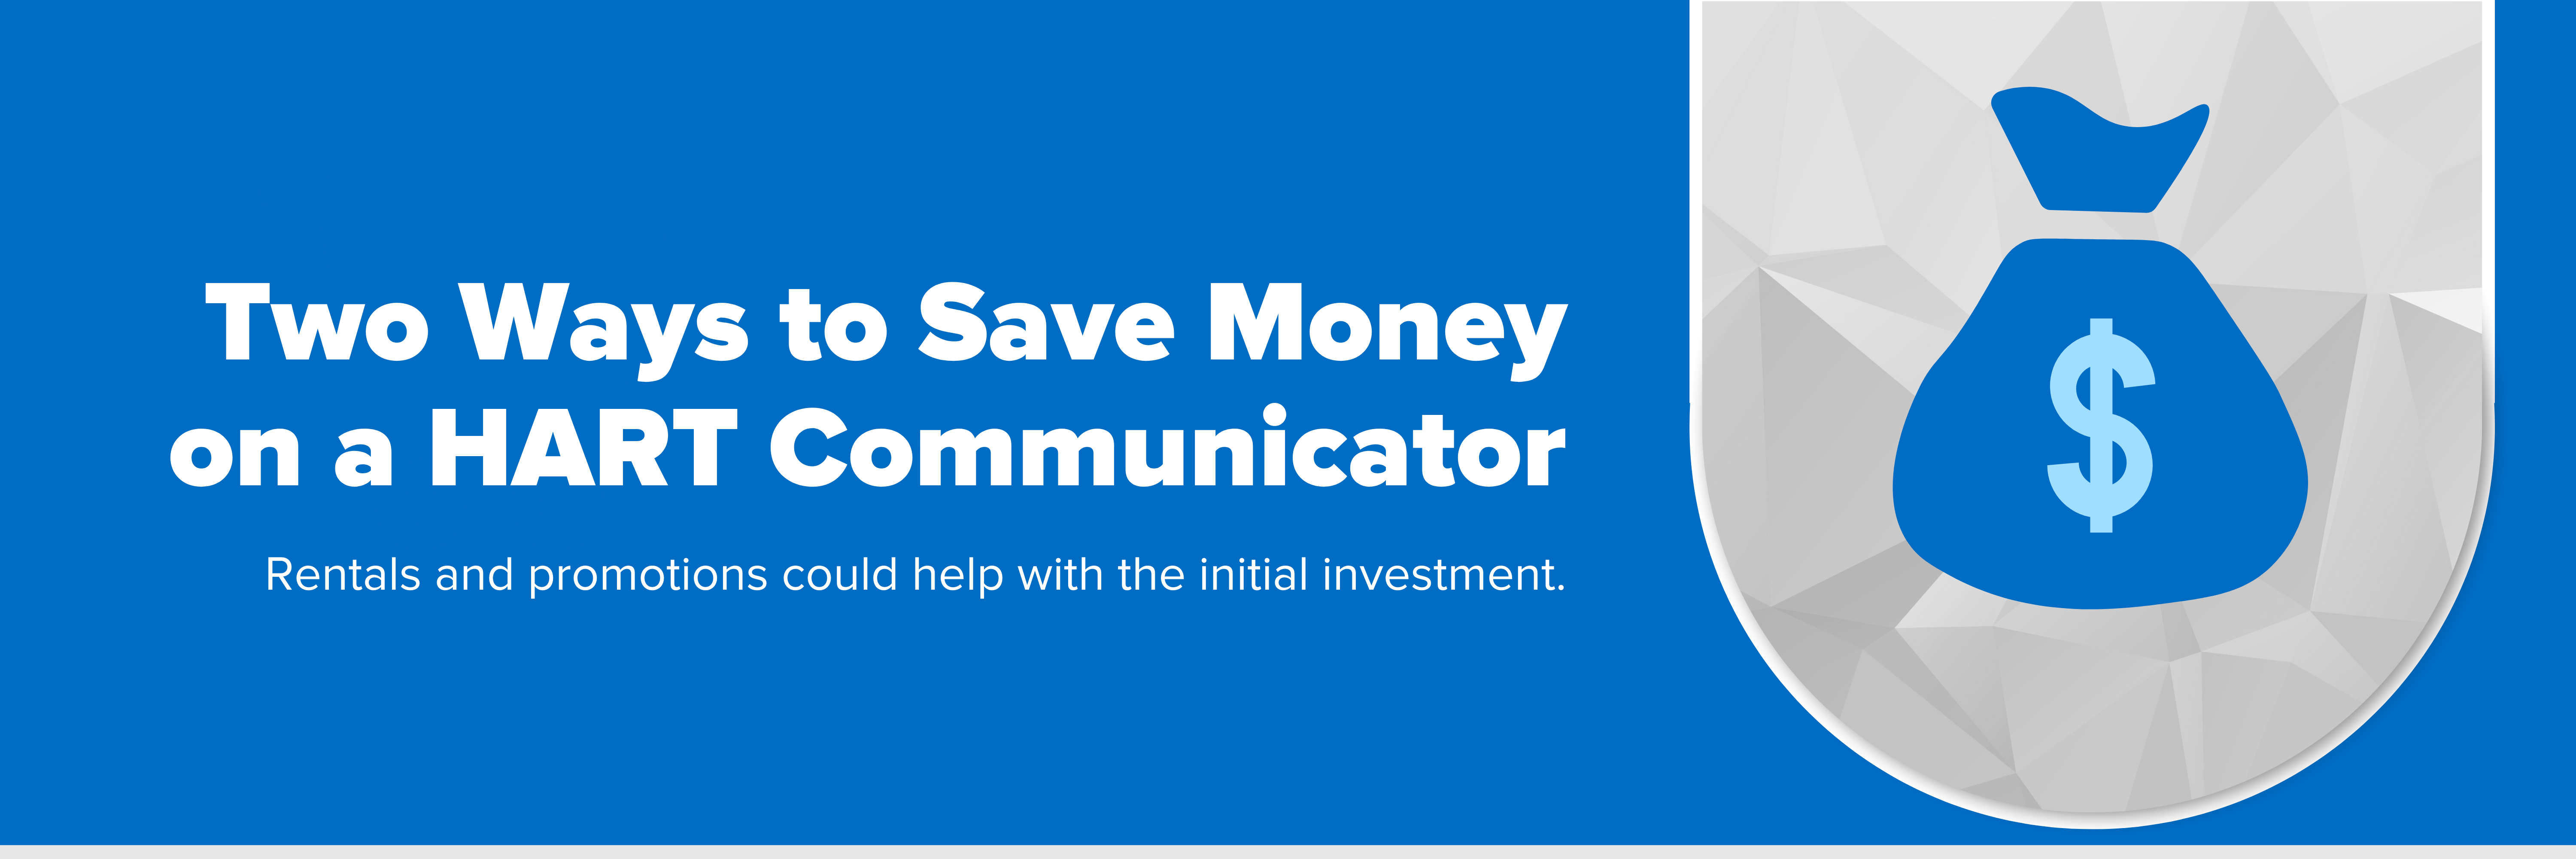 Header image with text "Two Ways to Save Money on a HART Communicator"